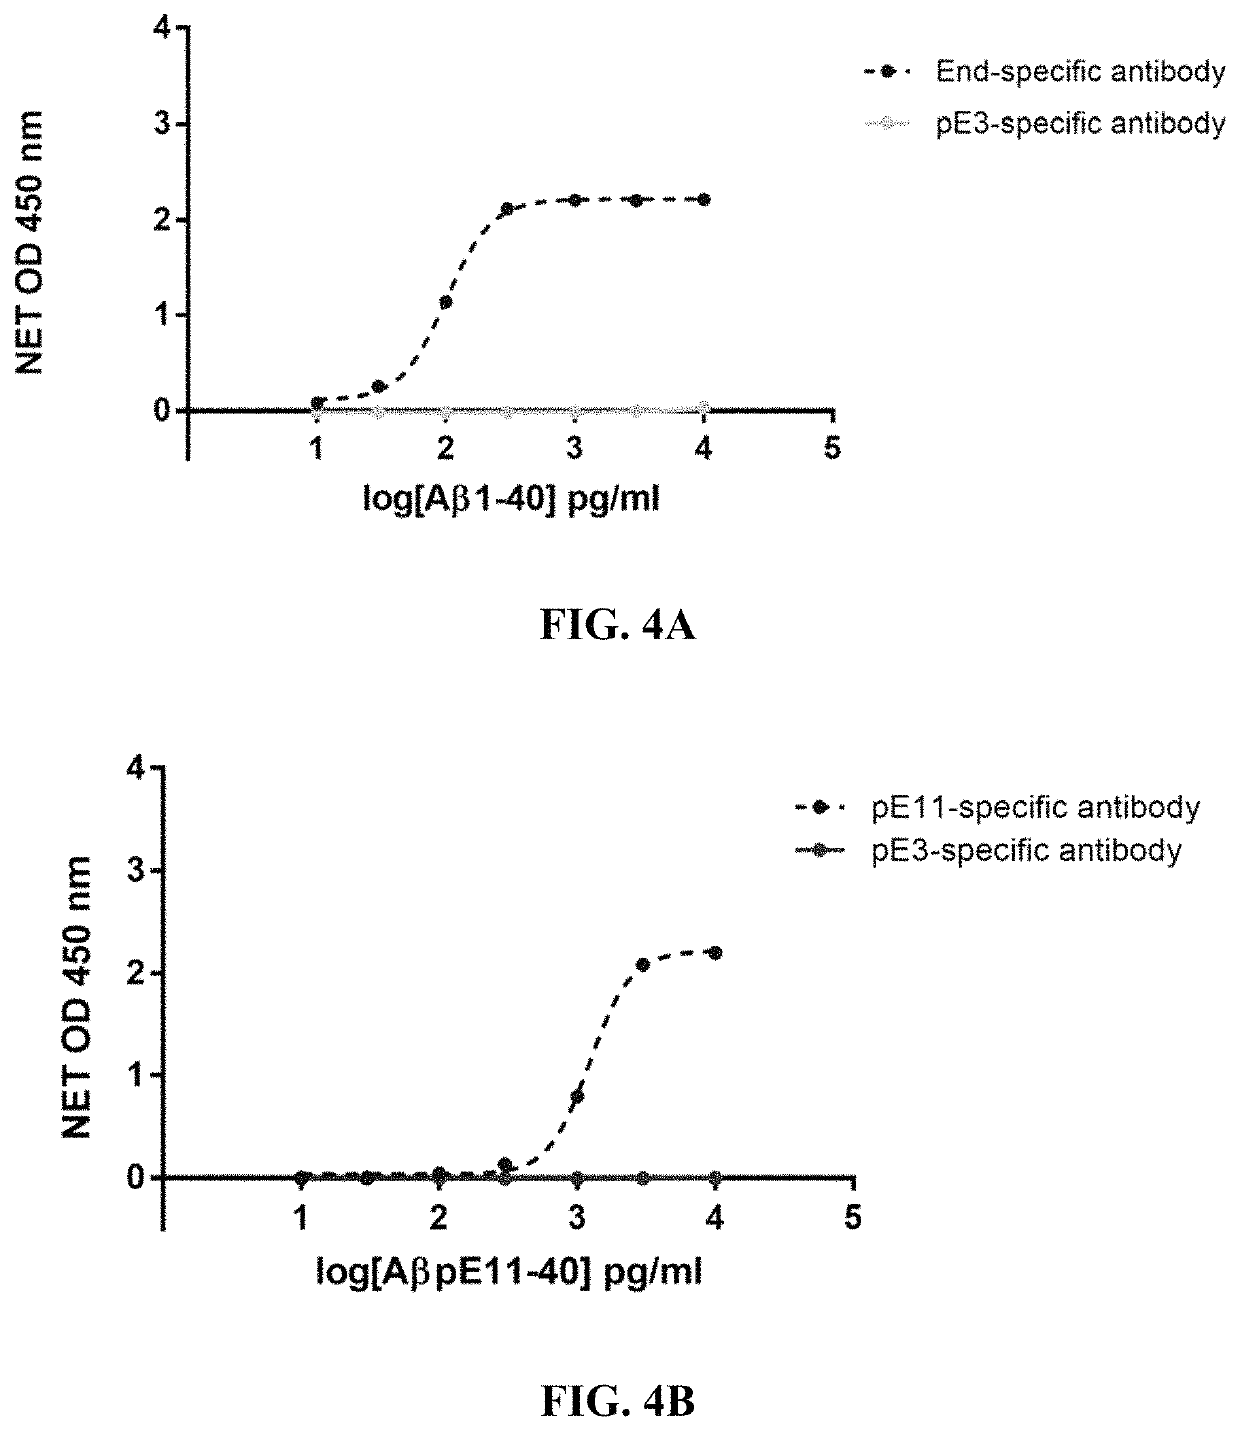 Antibodies to pyroglutamate amyloid-β and uses thereof